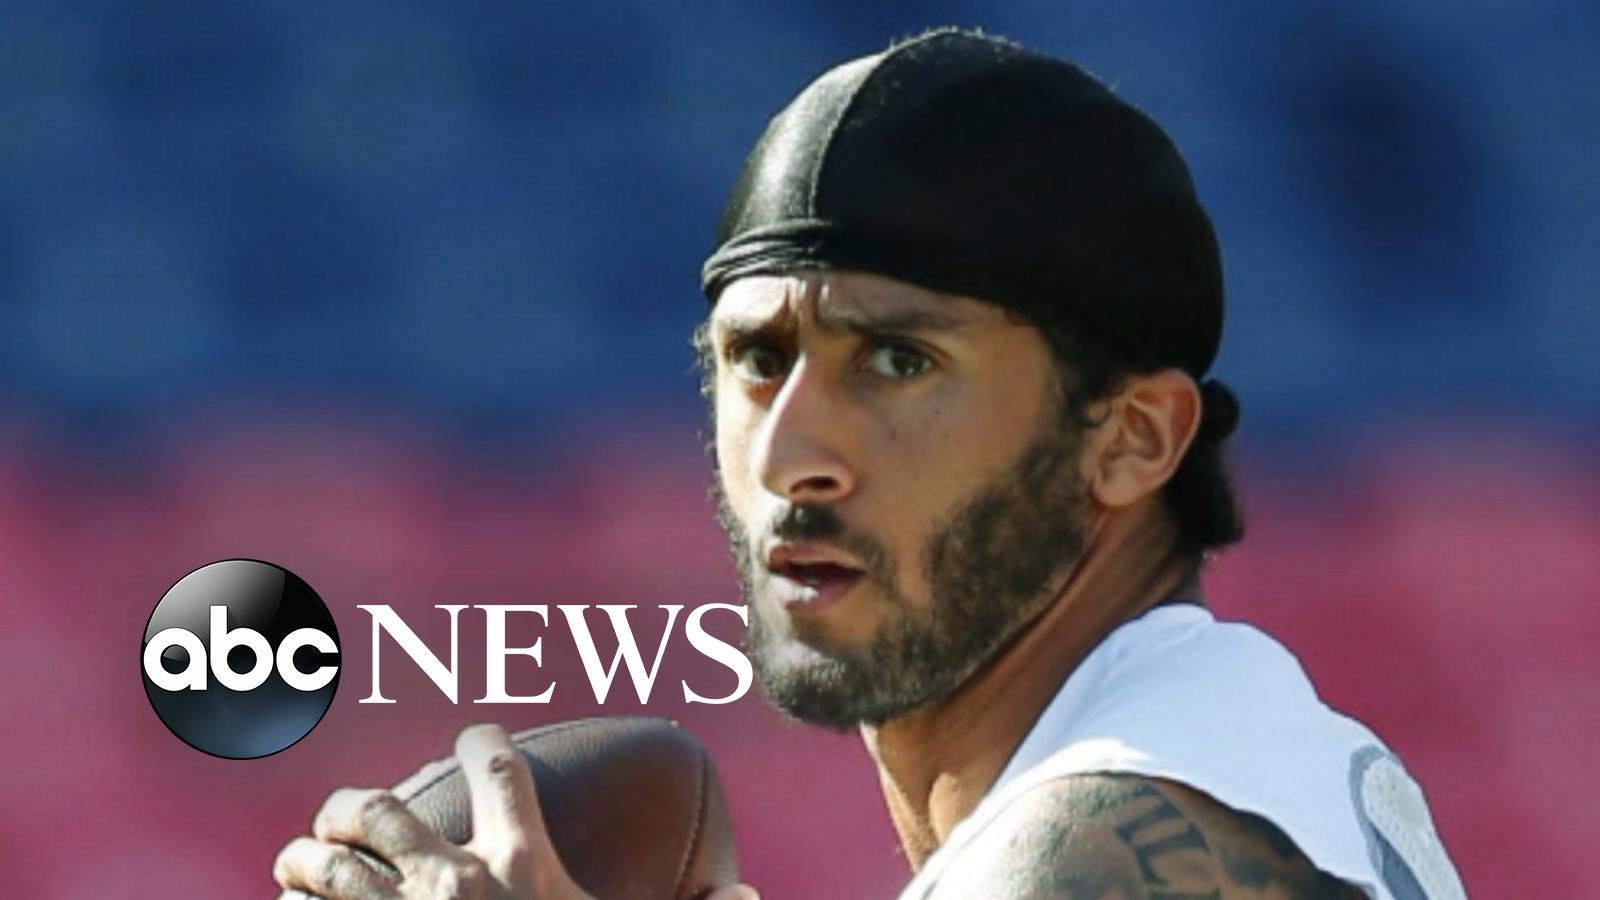 Colin Kaepernick Refuses to Stand During National Anthem